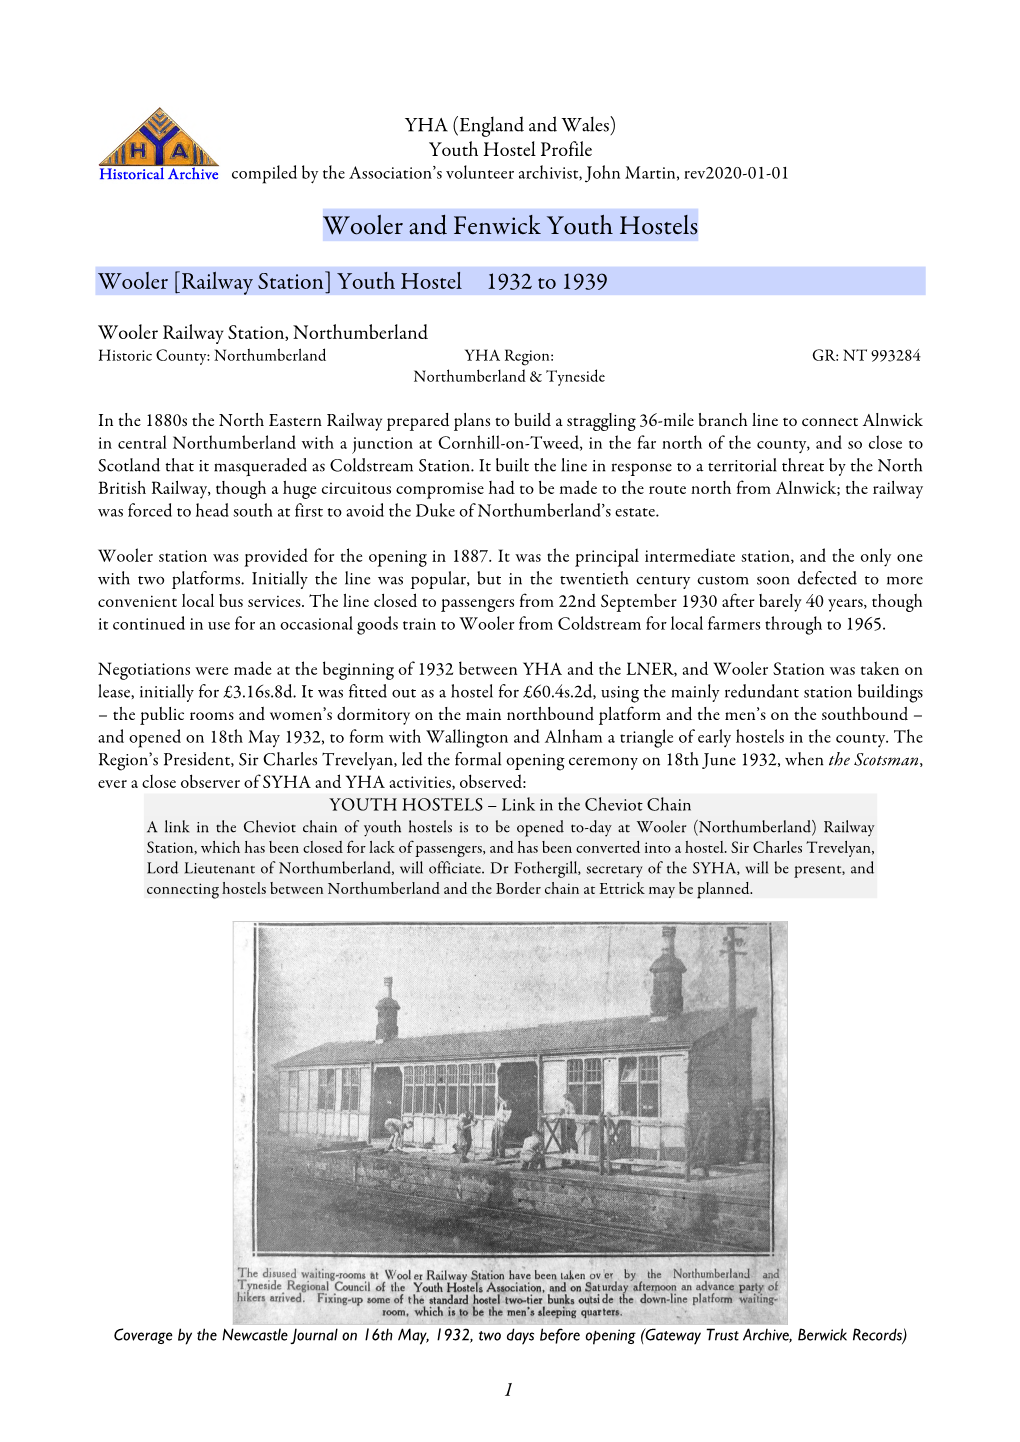 Wooler and Fenwick Youth Hostels